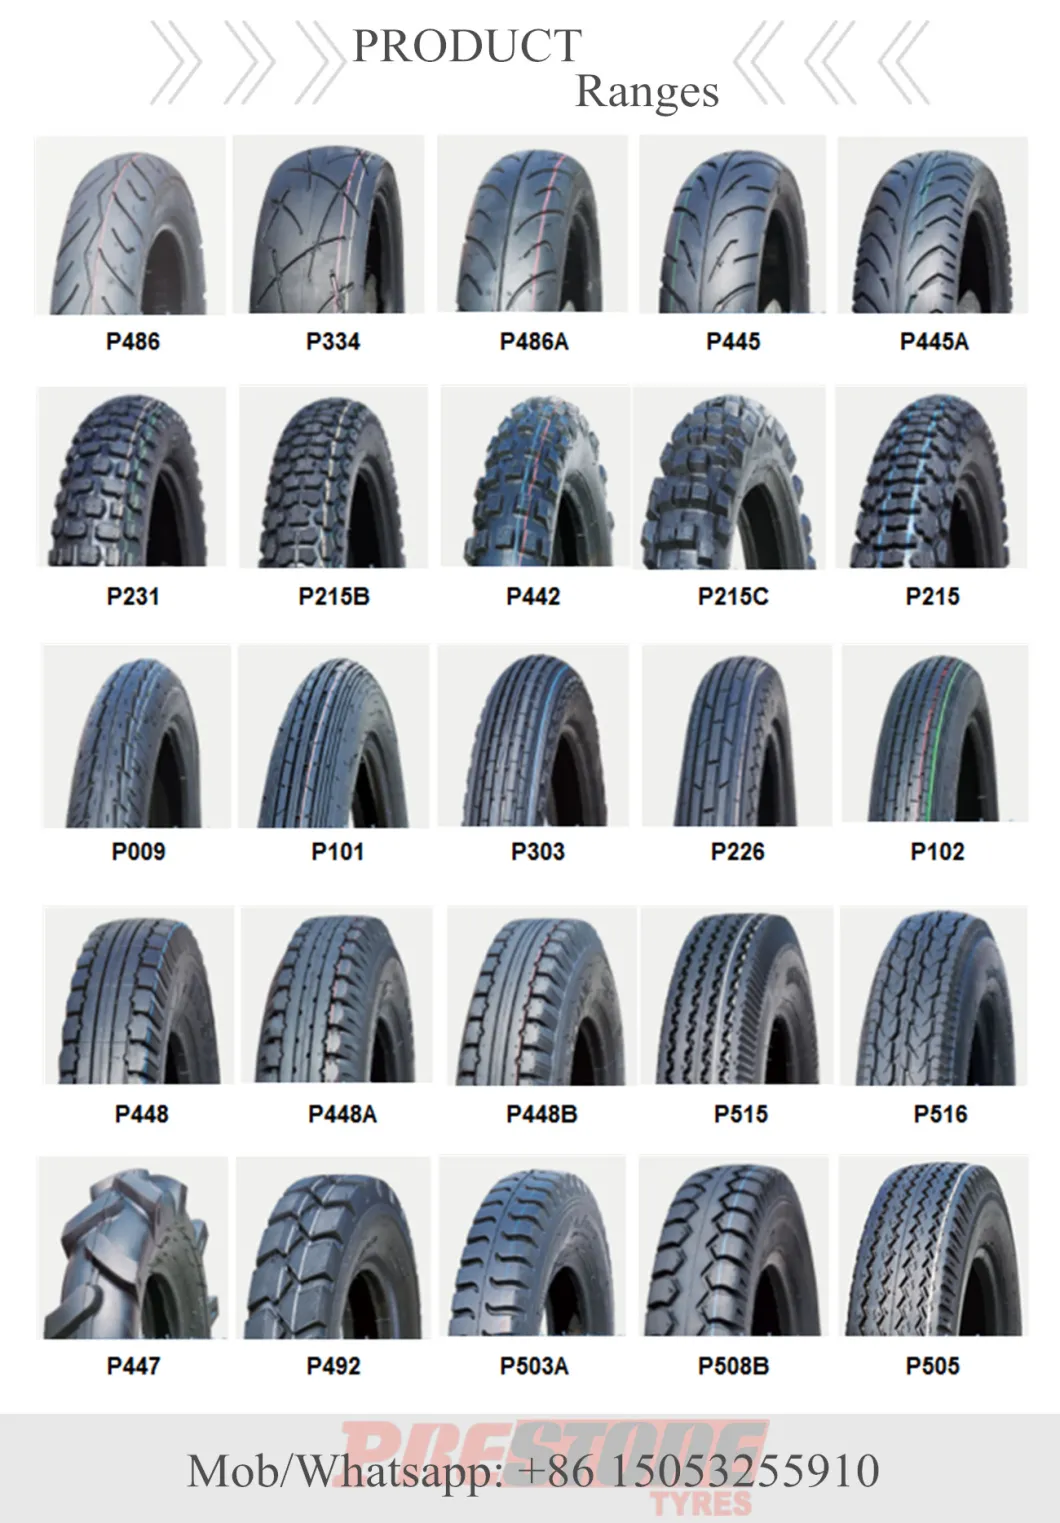 K97 190/55zr17 Prestone High Quality Sport Radial Motorcycle Front Rear Tyre Tire